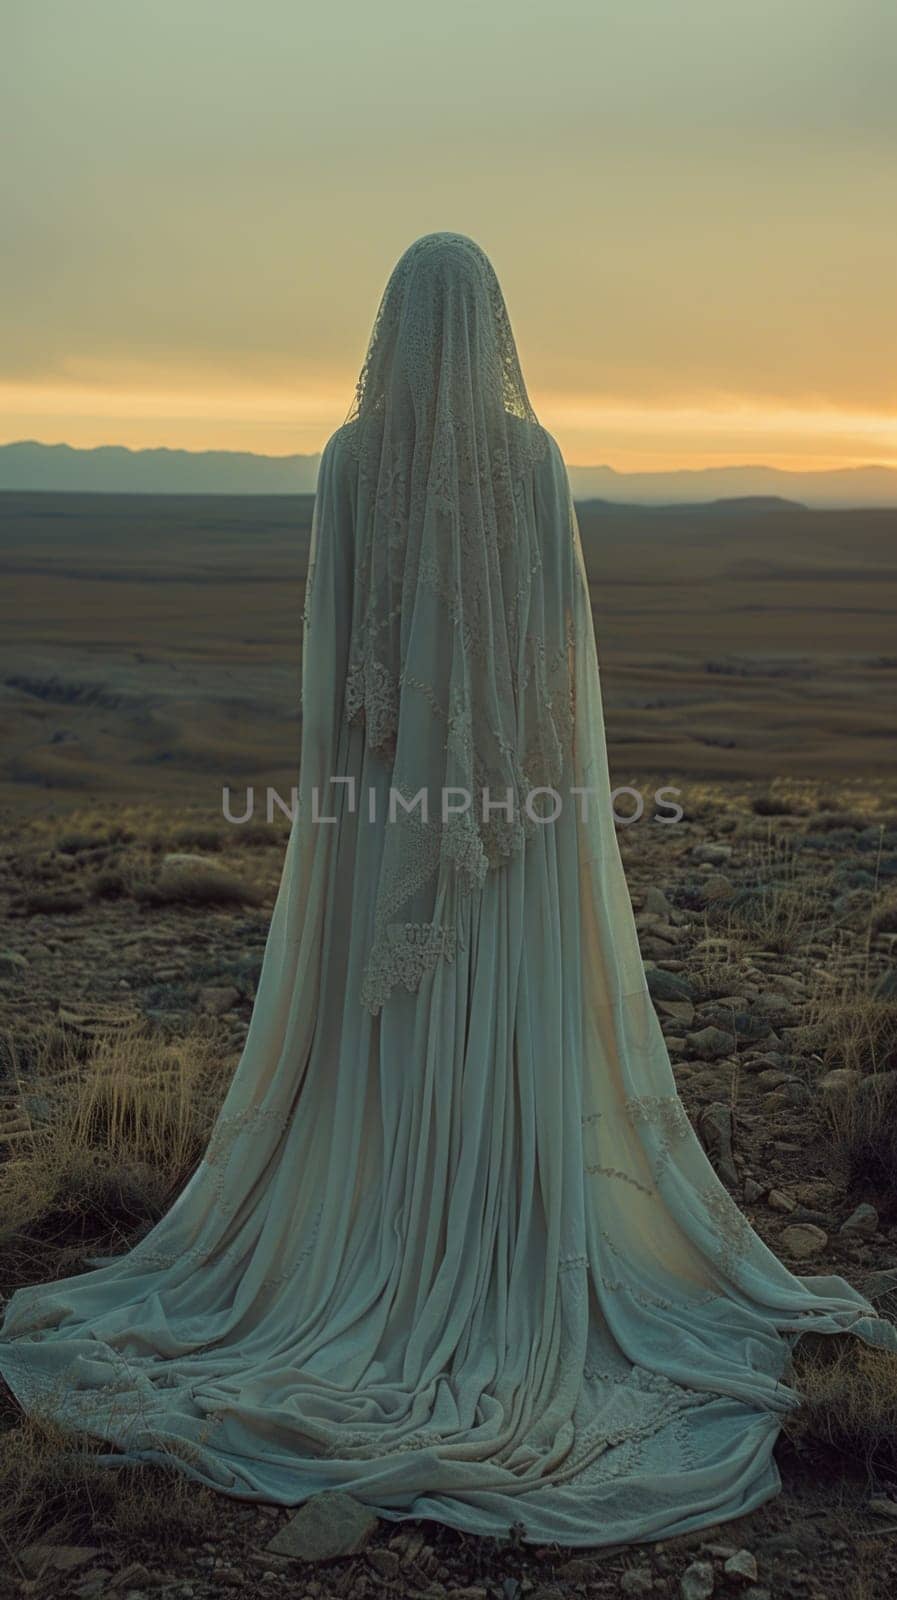 Woman in White Dress Standing in Field by but_photo